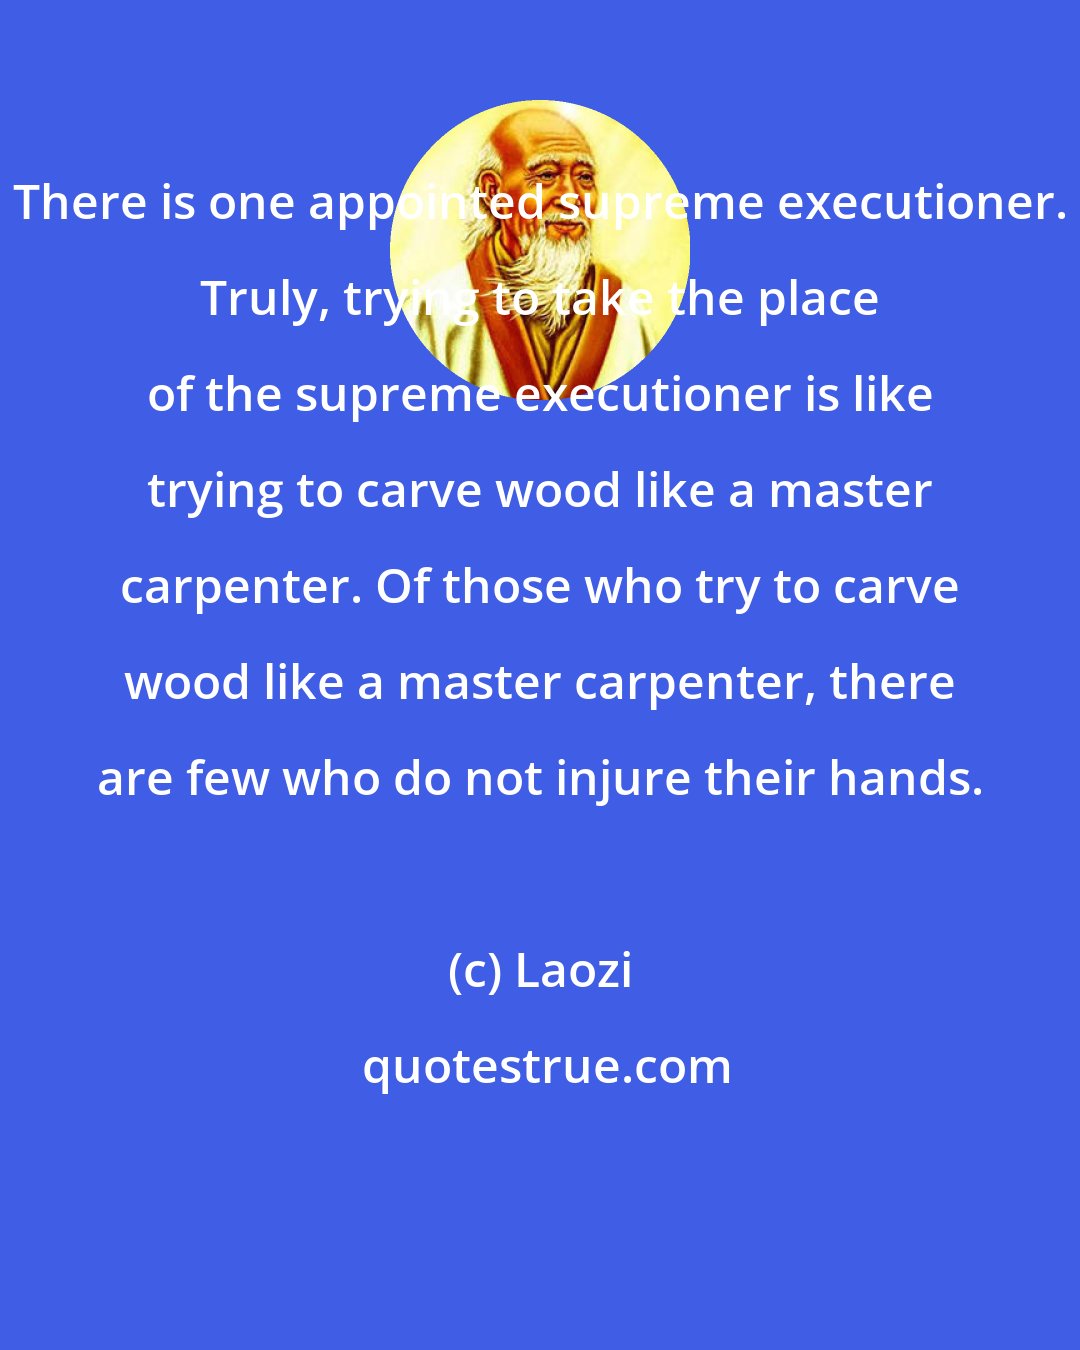 Laozi: There is one appointed supreme executioner. Truly, trying to take the place of the supreme executioner is like trying to carve wood like a master carpenter. Of those who try to carve wood like a master carpenter, there are few who do not injure their hands.